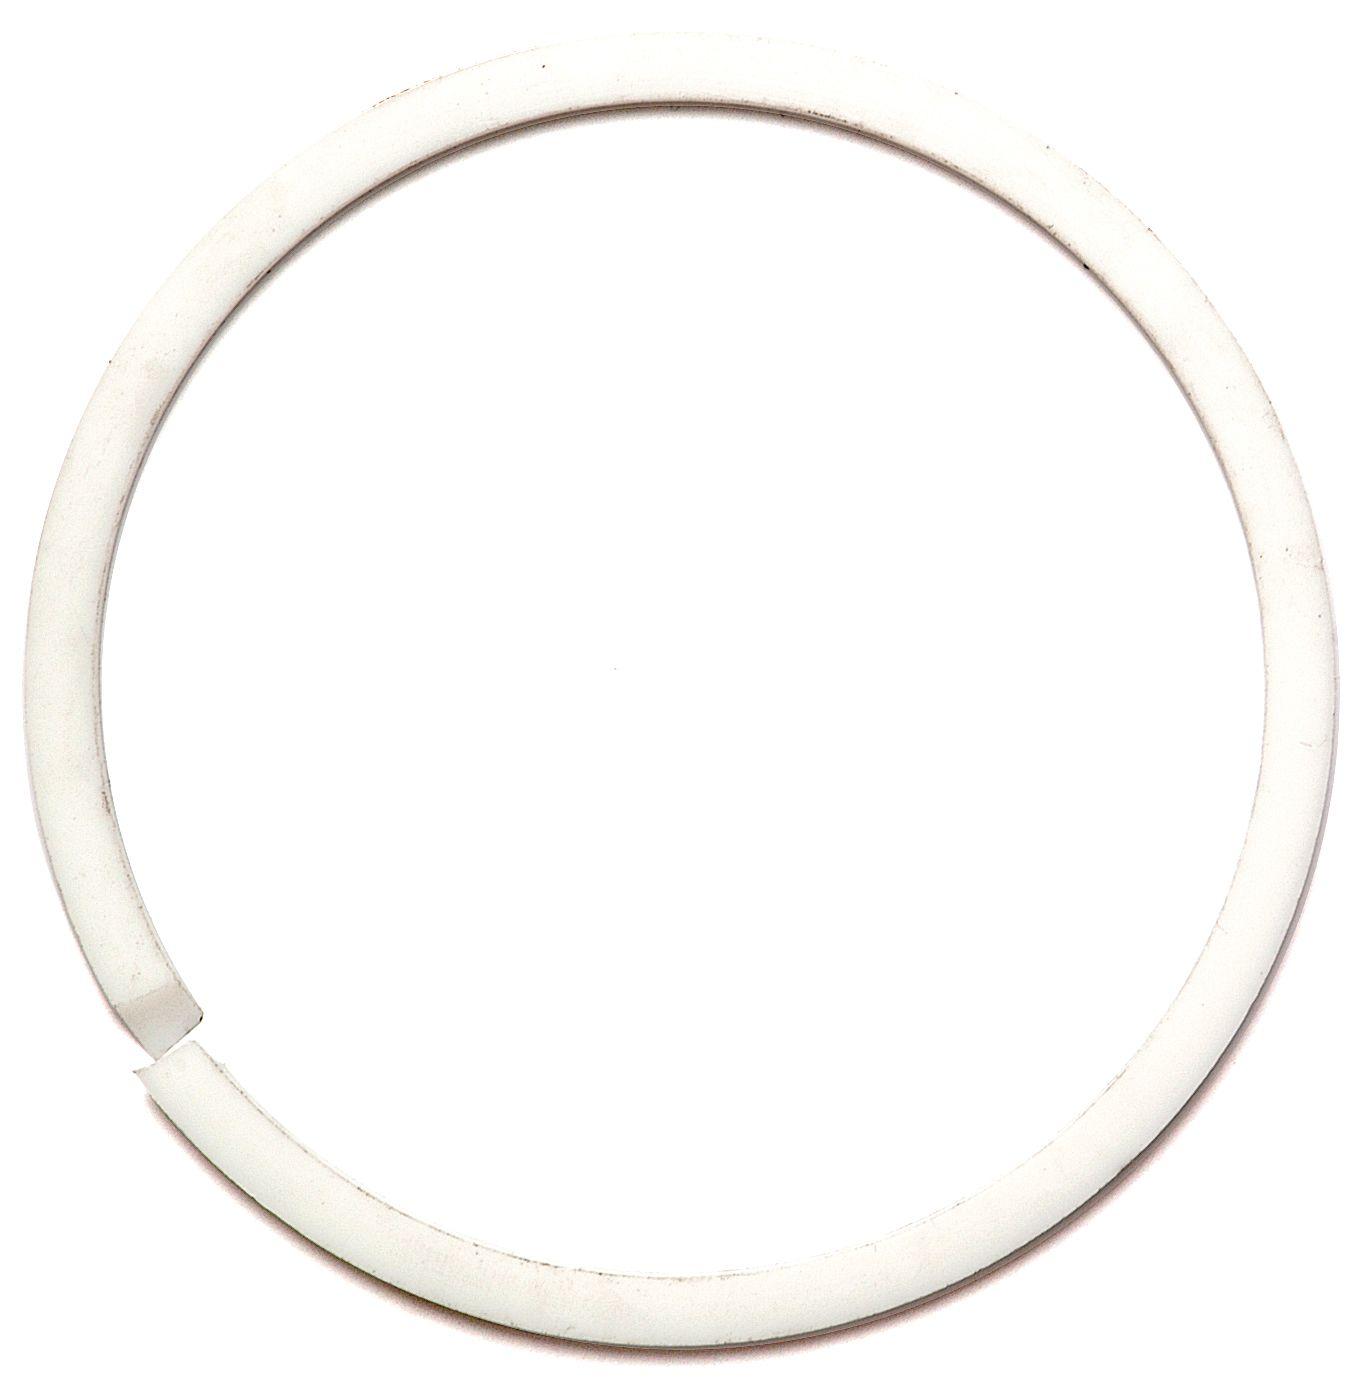 MCCORMICK PTFE WASHER 12284